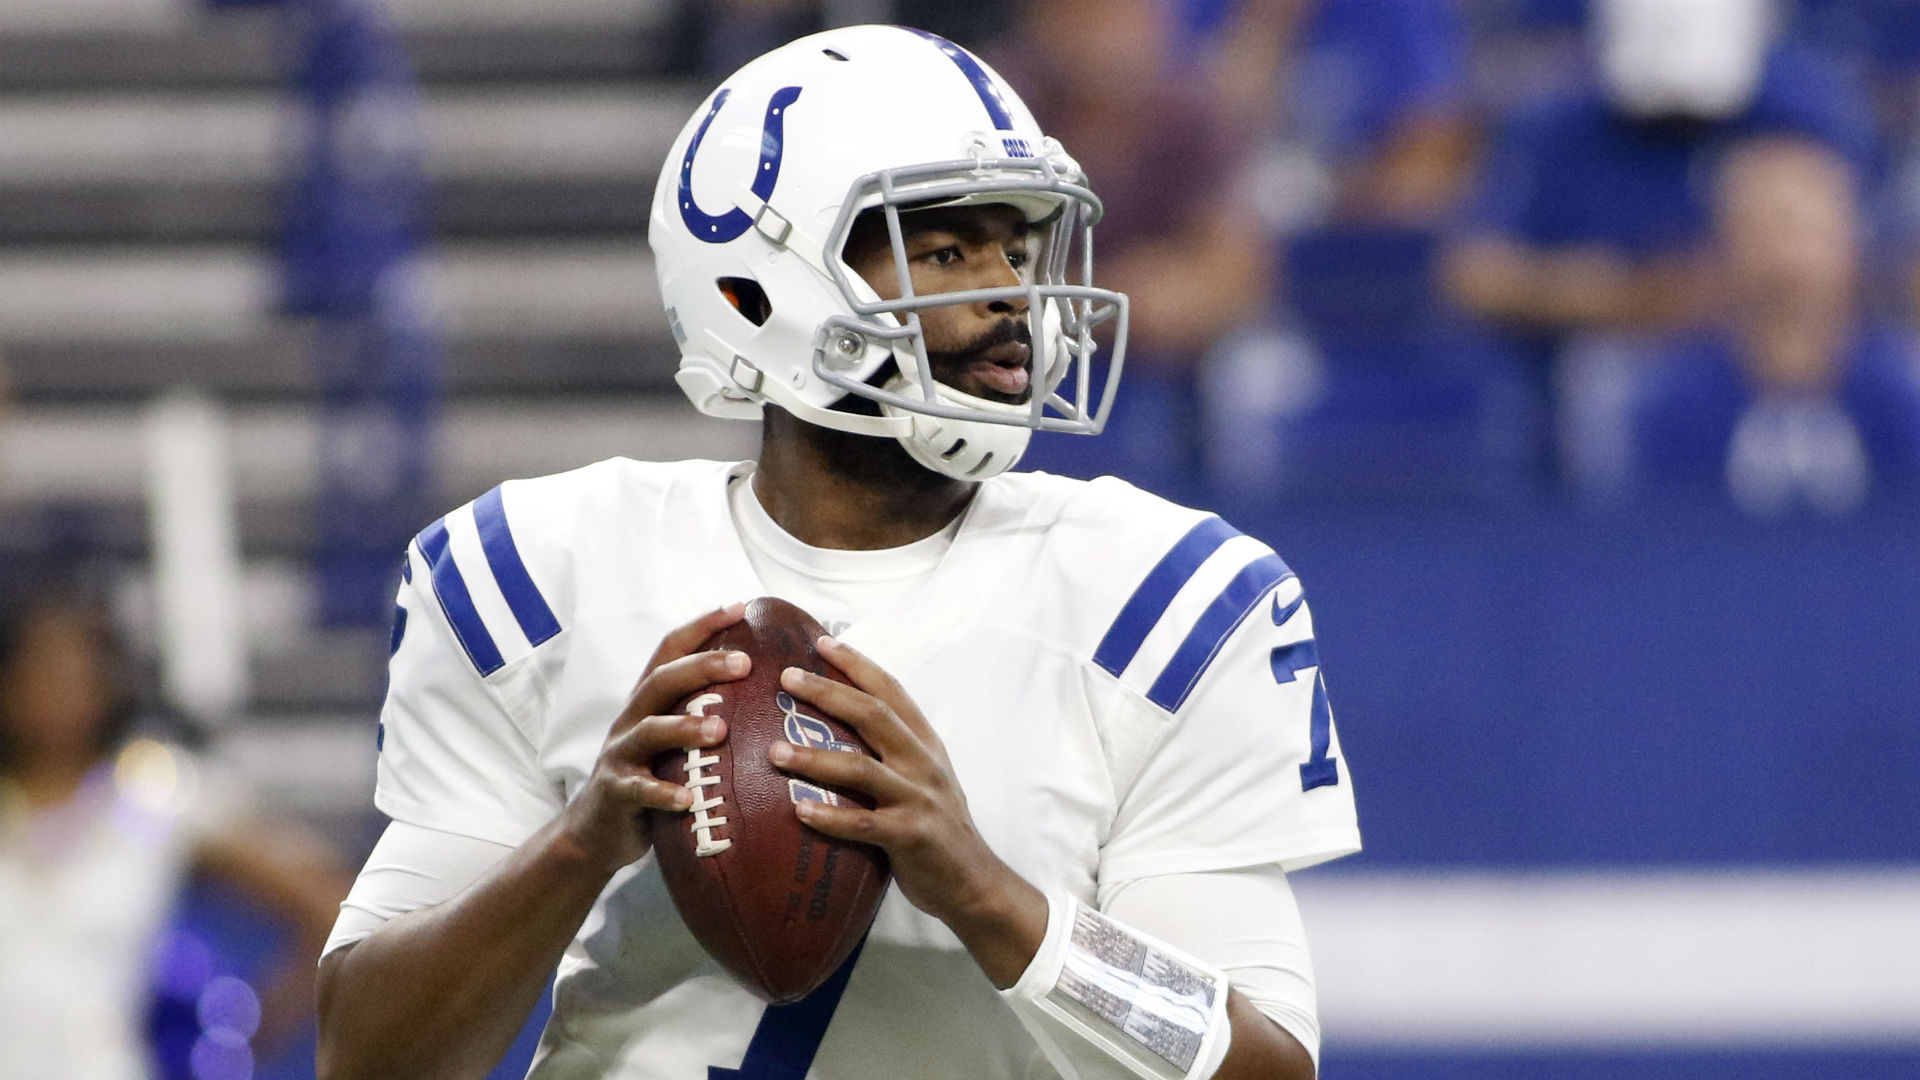 Jacoby Brissett has not recovered in time to play for the Indianapolis Colts against the Miami Dolphins on Sunday.